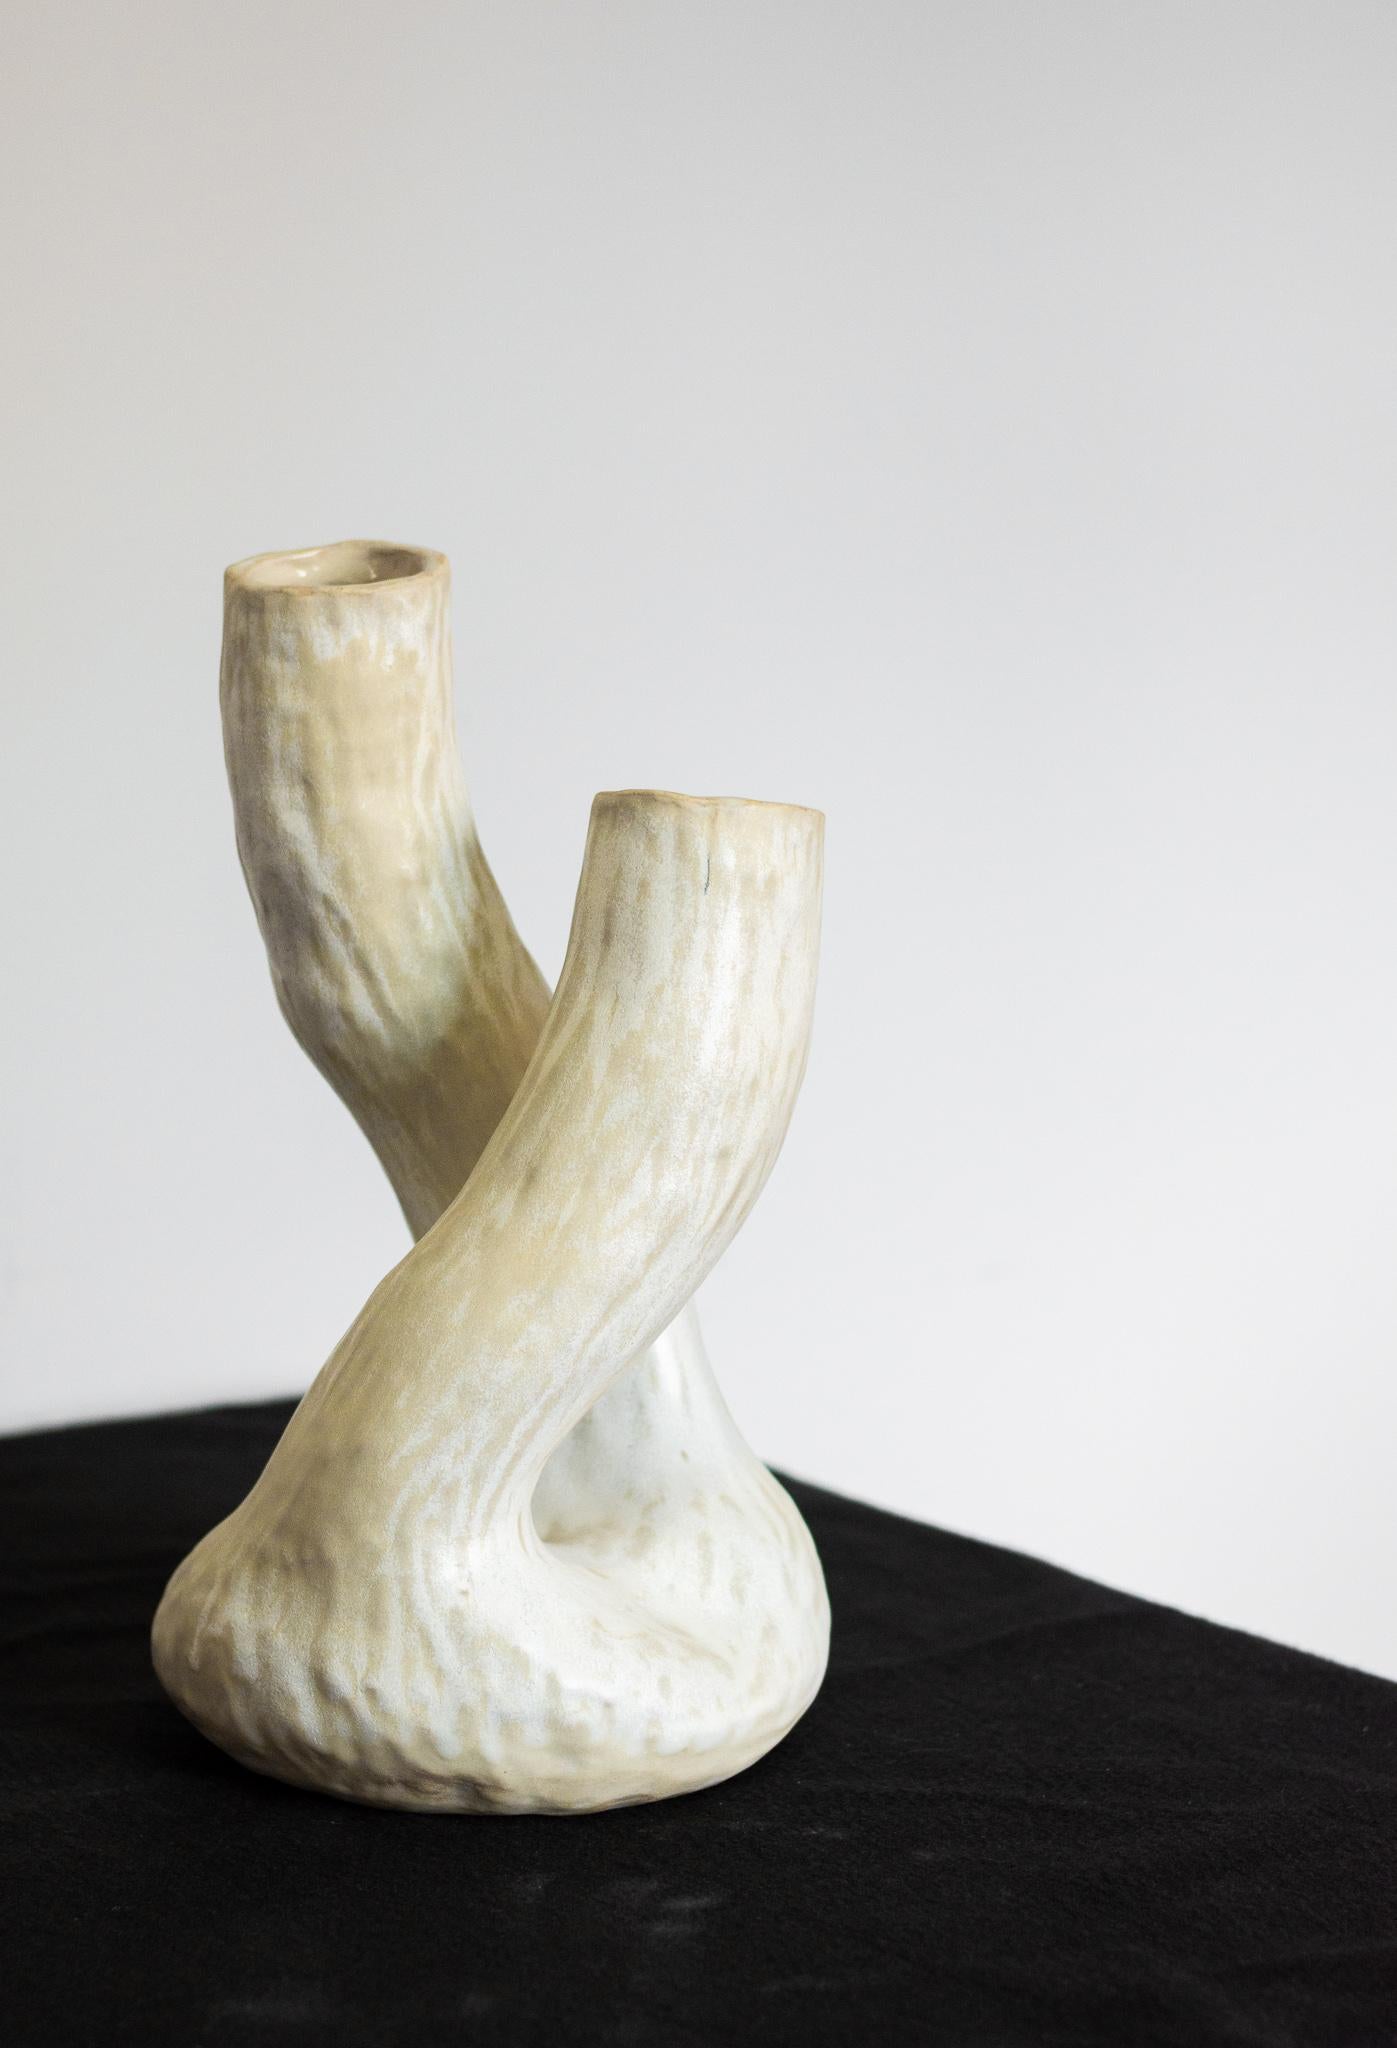 The vase from the Alba series, especially the N.4 vase, is a unique piece that embraces the artisanal process. Manufactured without the use of molds, each vase absorbs the distinct contours and textures of the artist's hand, resulting in a clean and